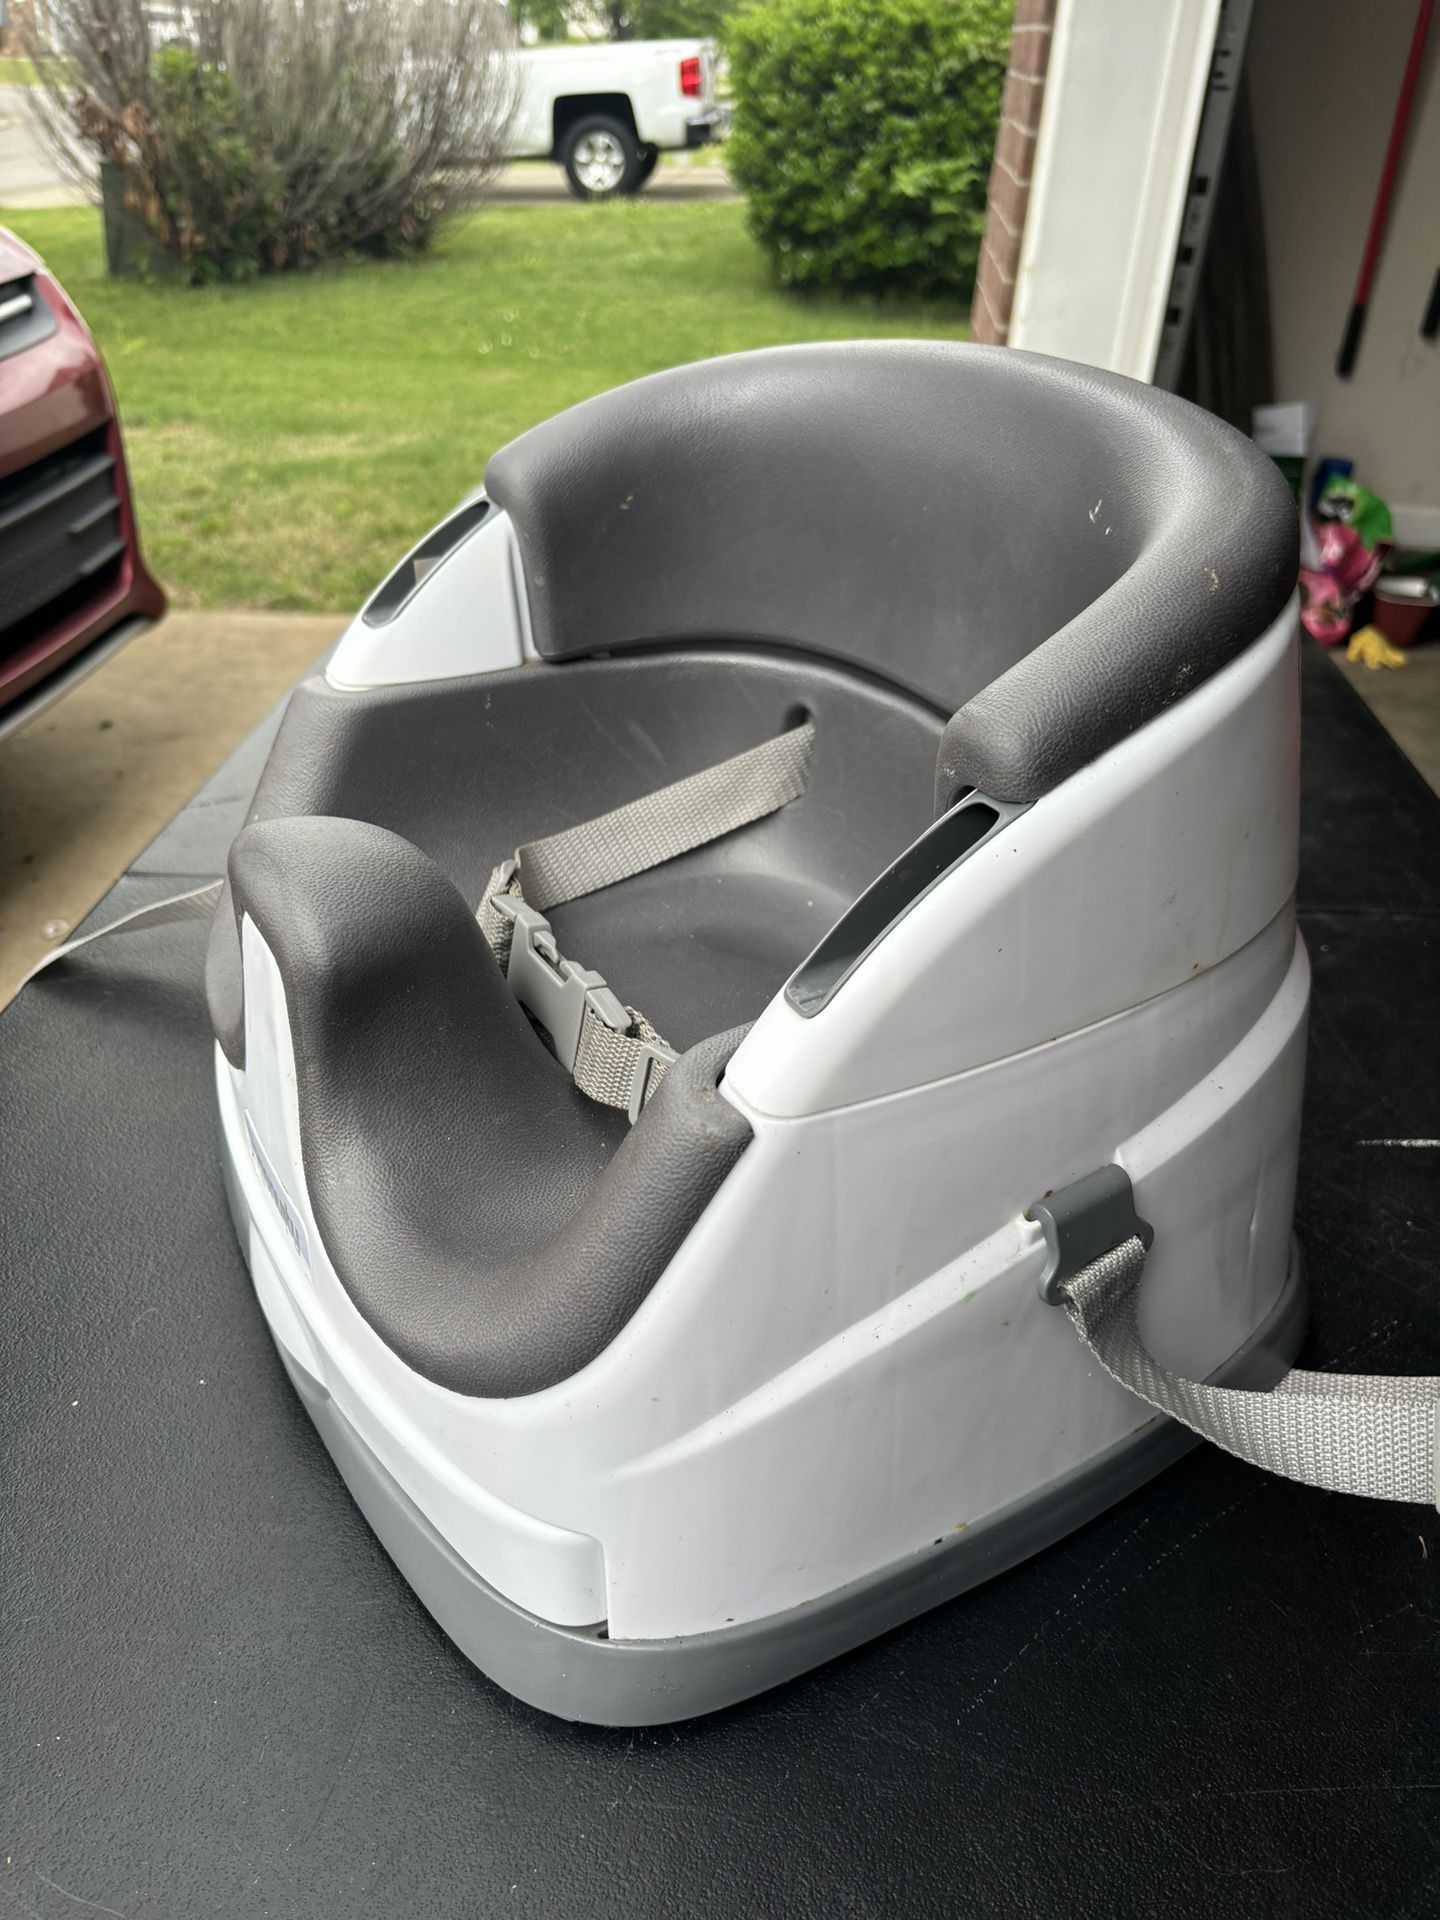 Booster Seat With Tray